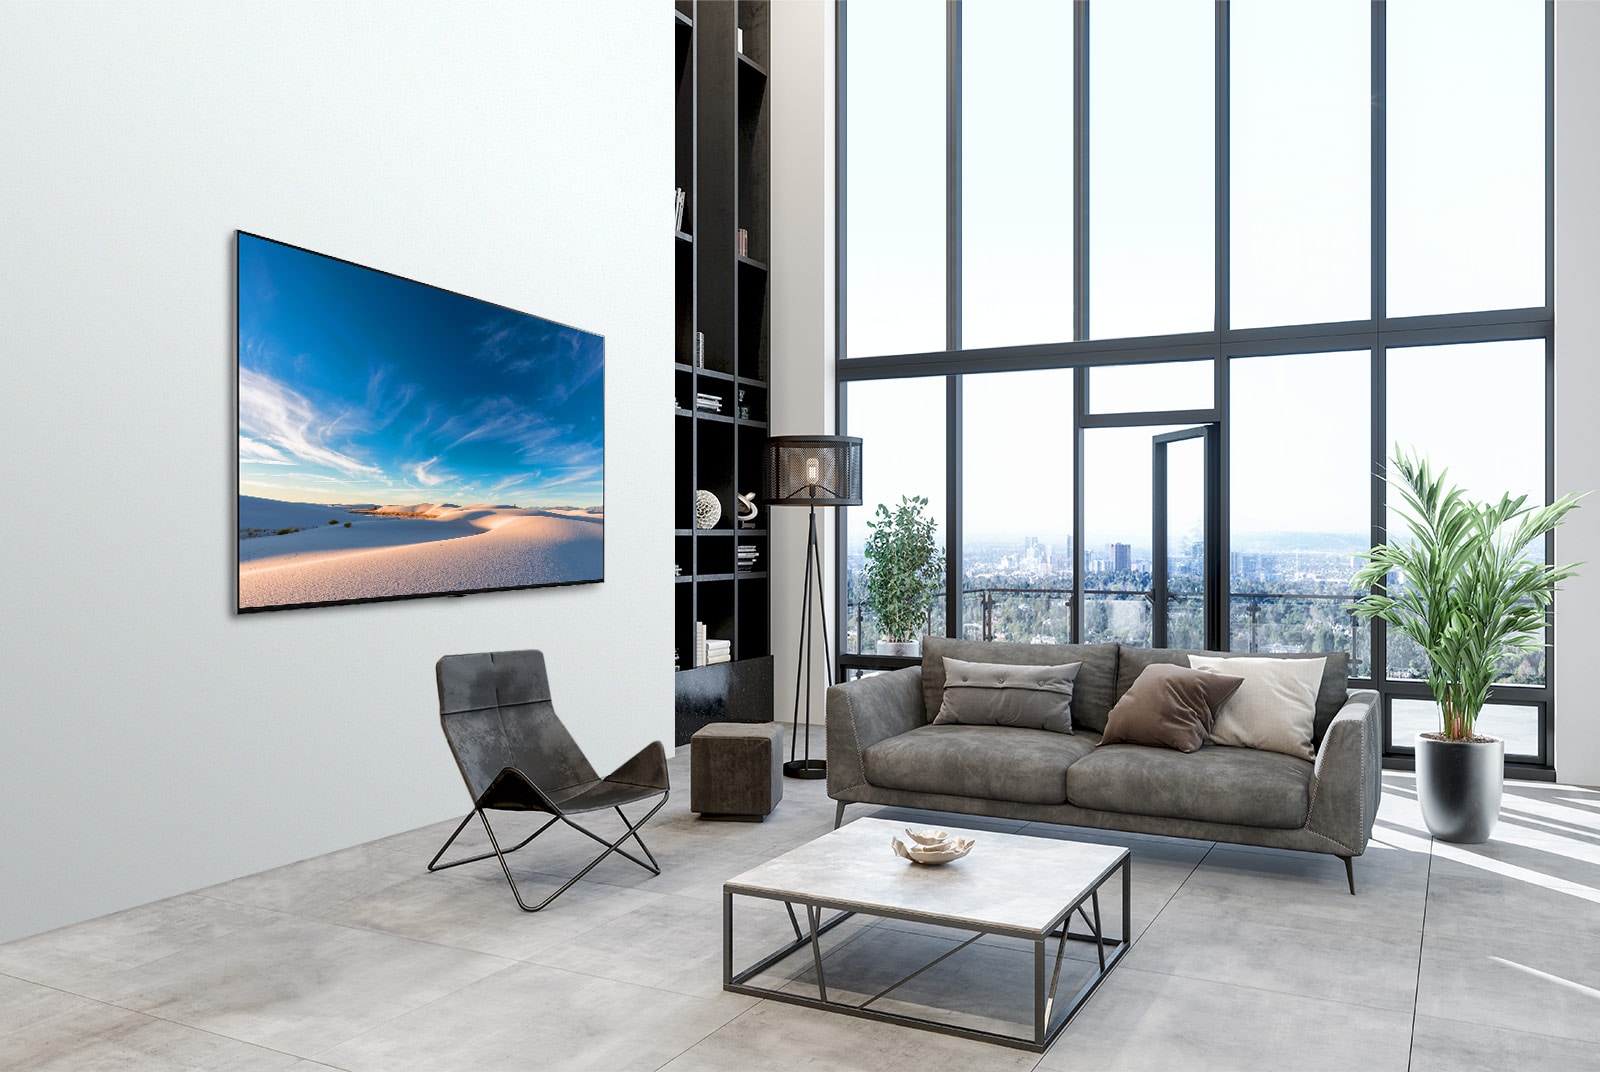 LG QNED Mini LED TV mounted flat against the wall in a modern interior space.